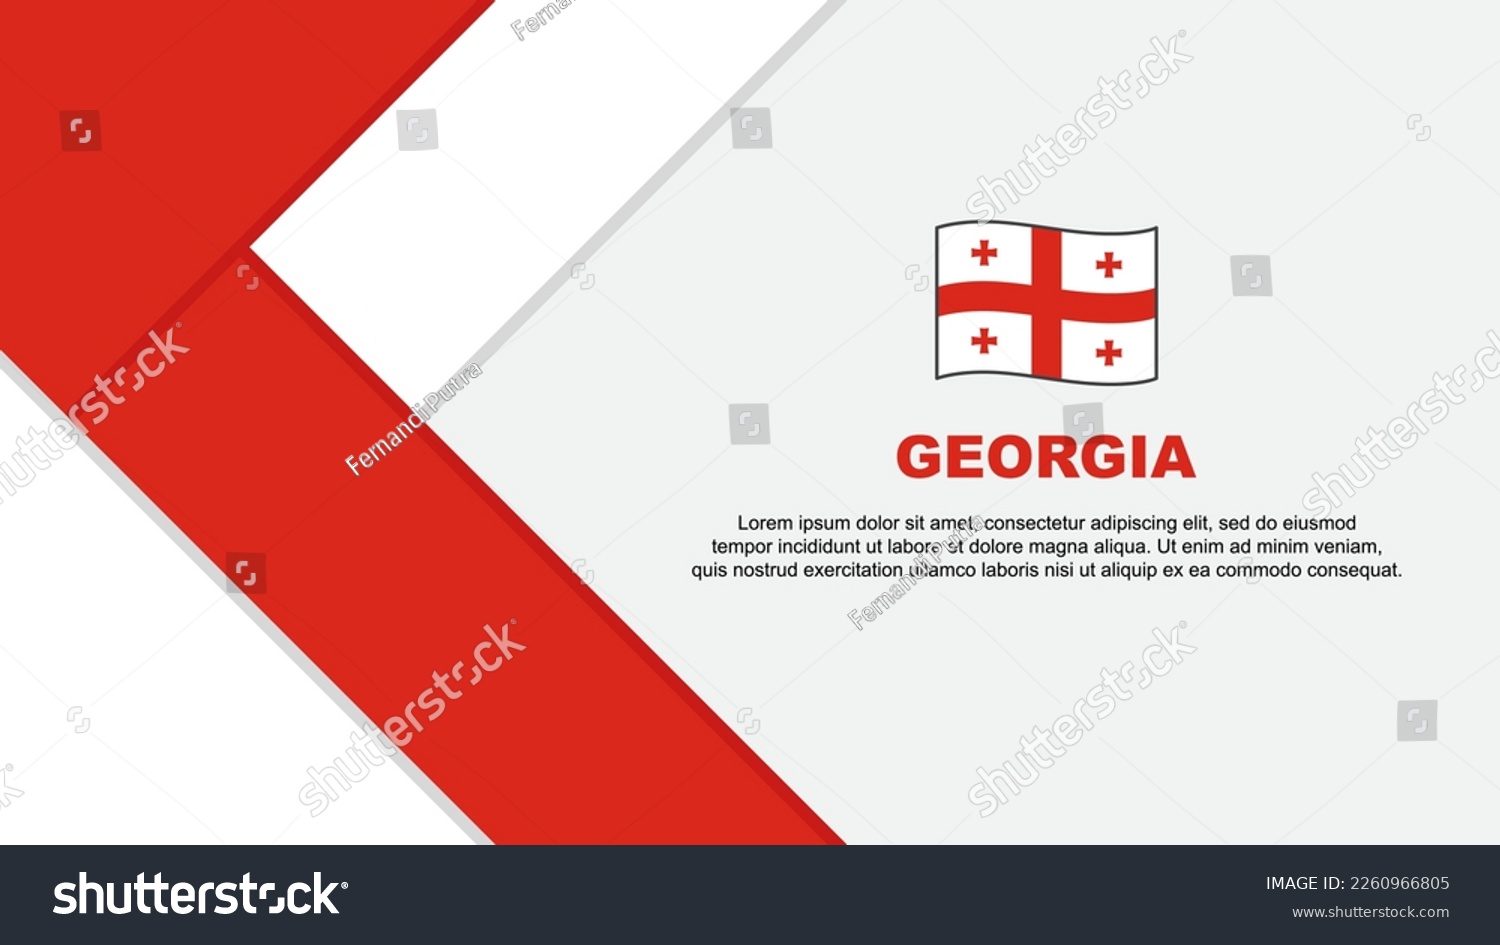 SVG of Georgia Flag Abstract Background Design Template. Georgia Independence Day Banner Cartoon Vector Illustration. Georgia Illustration svg